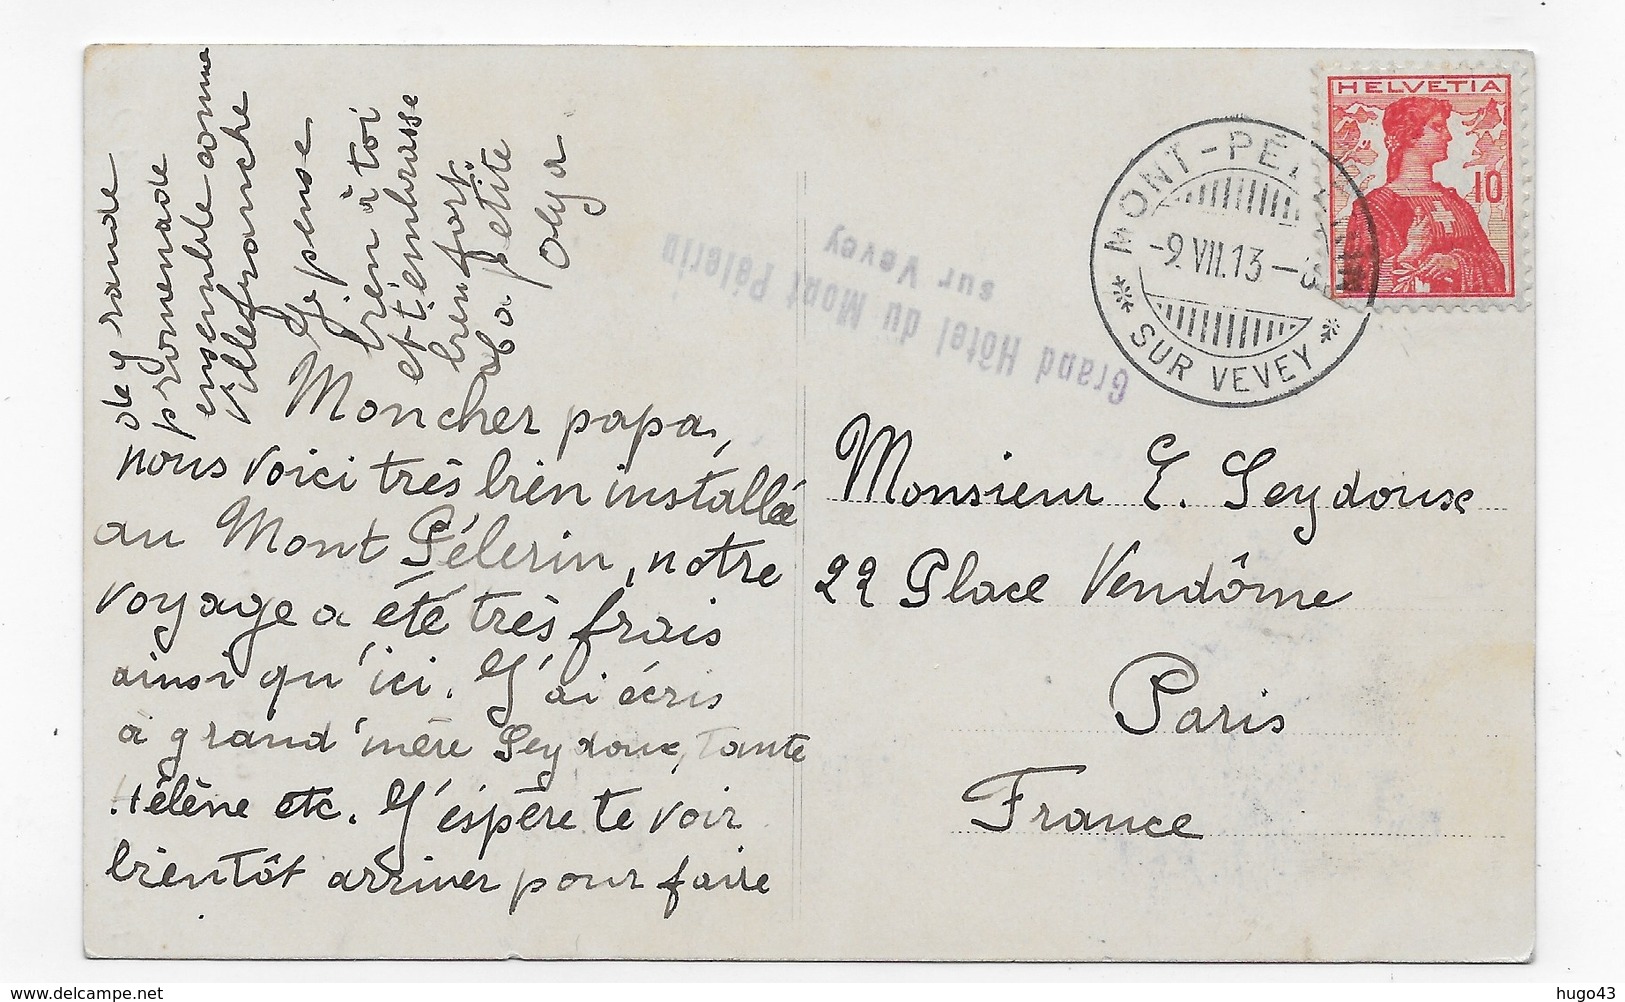 (RECTO / VERSO) CHANTILLY EN 1913 - MUSEE CONDE - INGRES A 24 ANS - BEAU TIMBRE SUISSE ET CACHET - CPA VOYAGEE - Chantilly